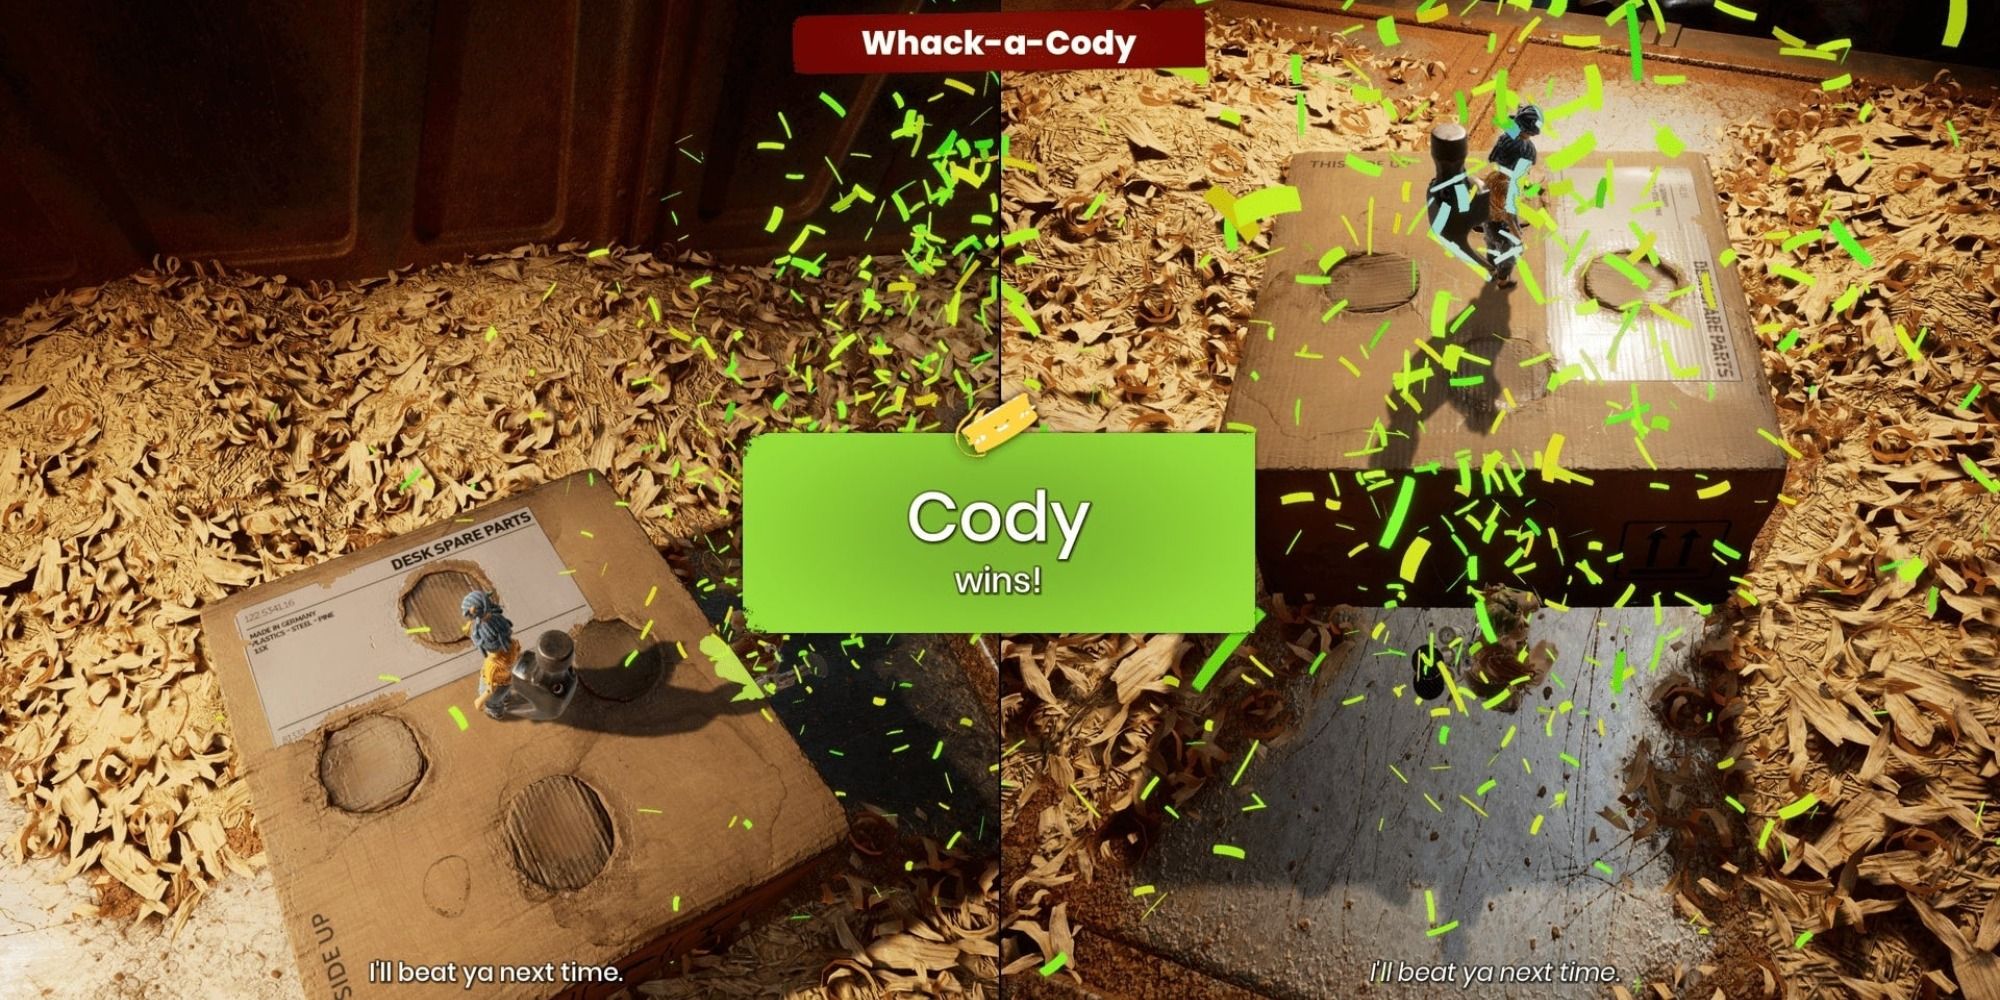 It Takes Two Whack-A-Cody minigame, Cody wins